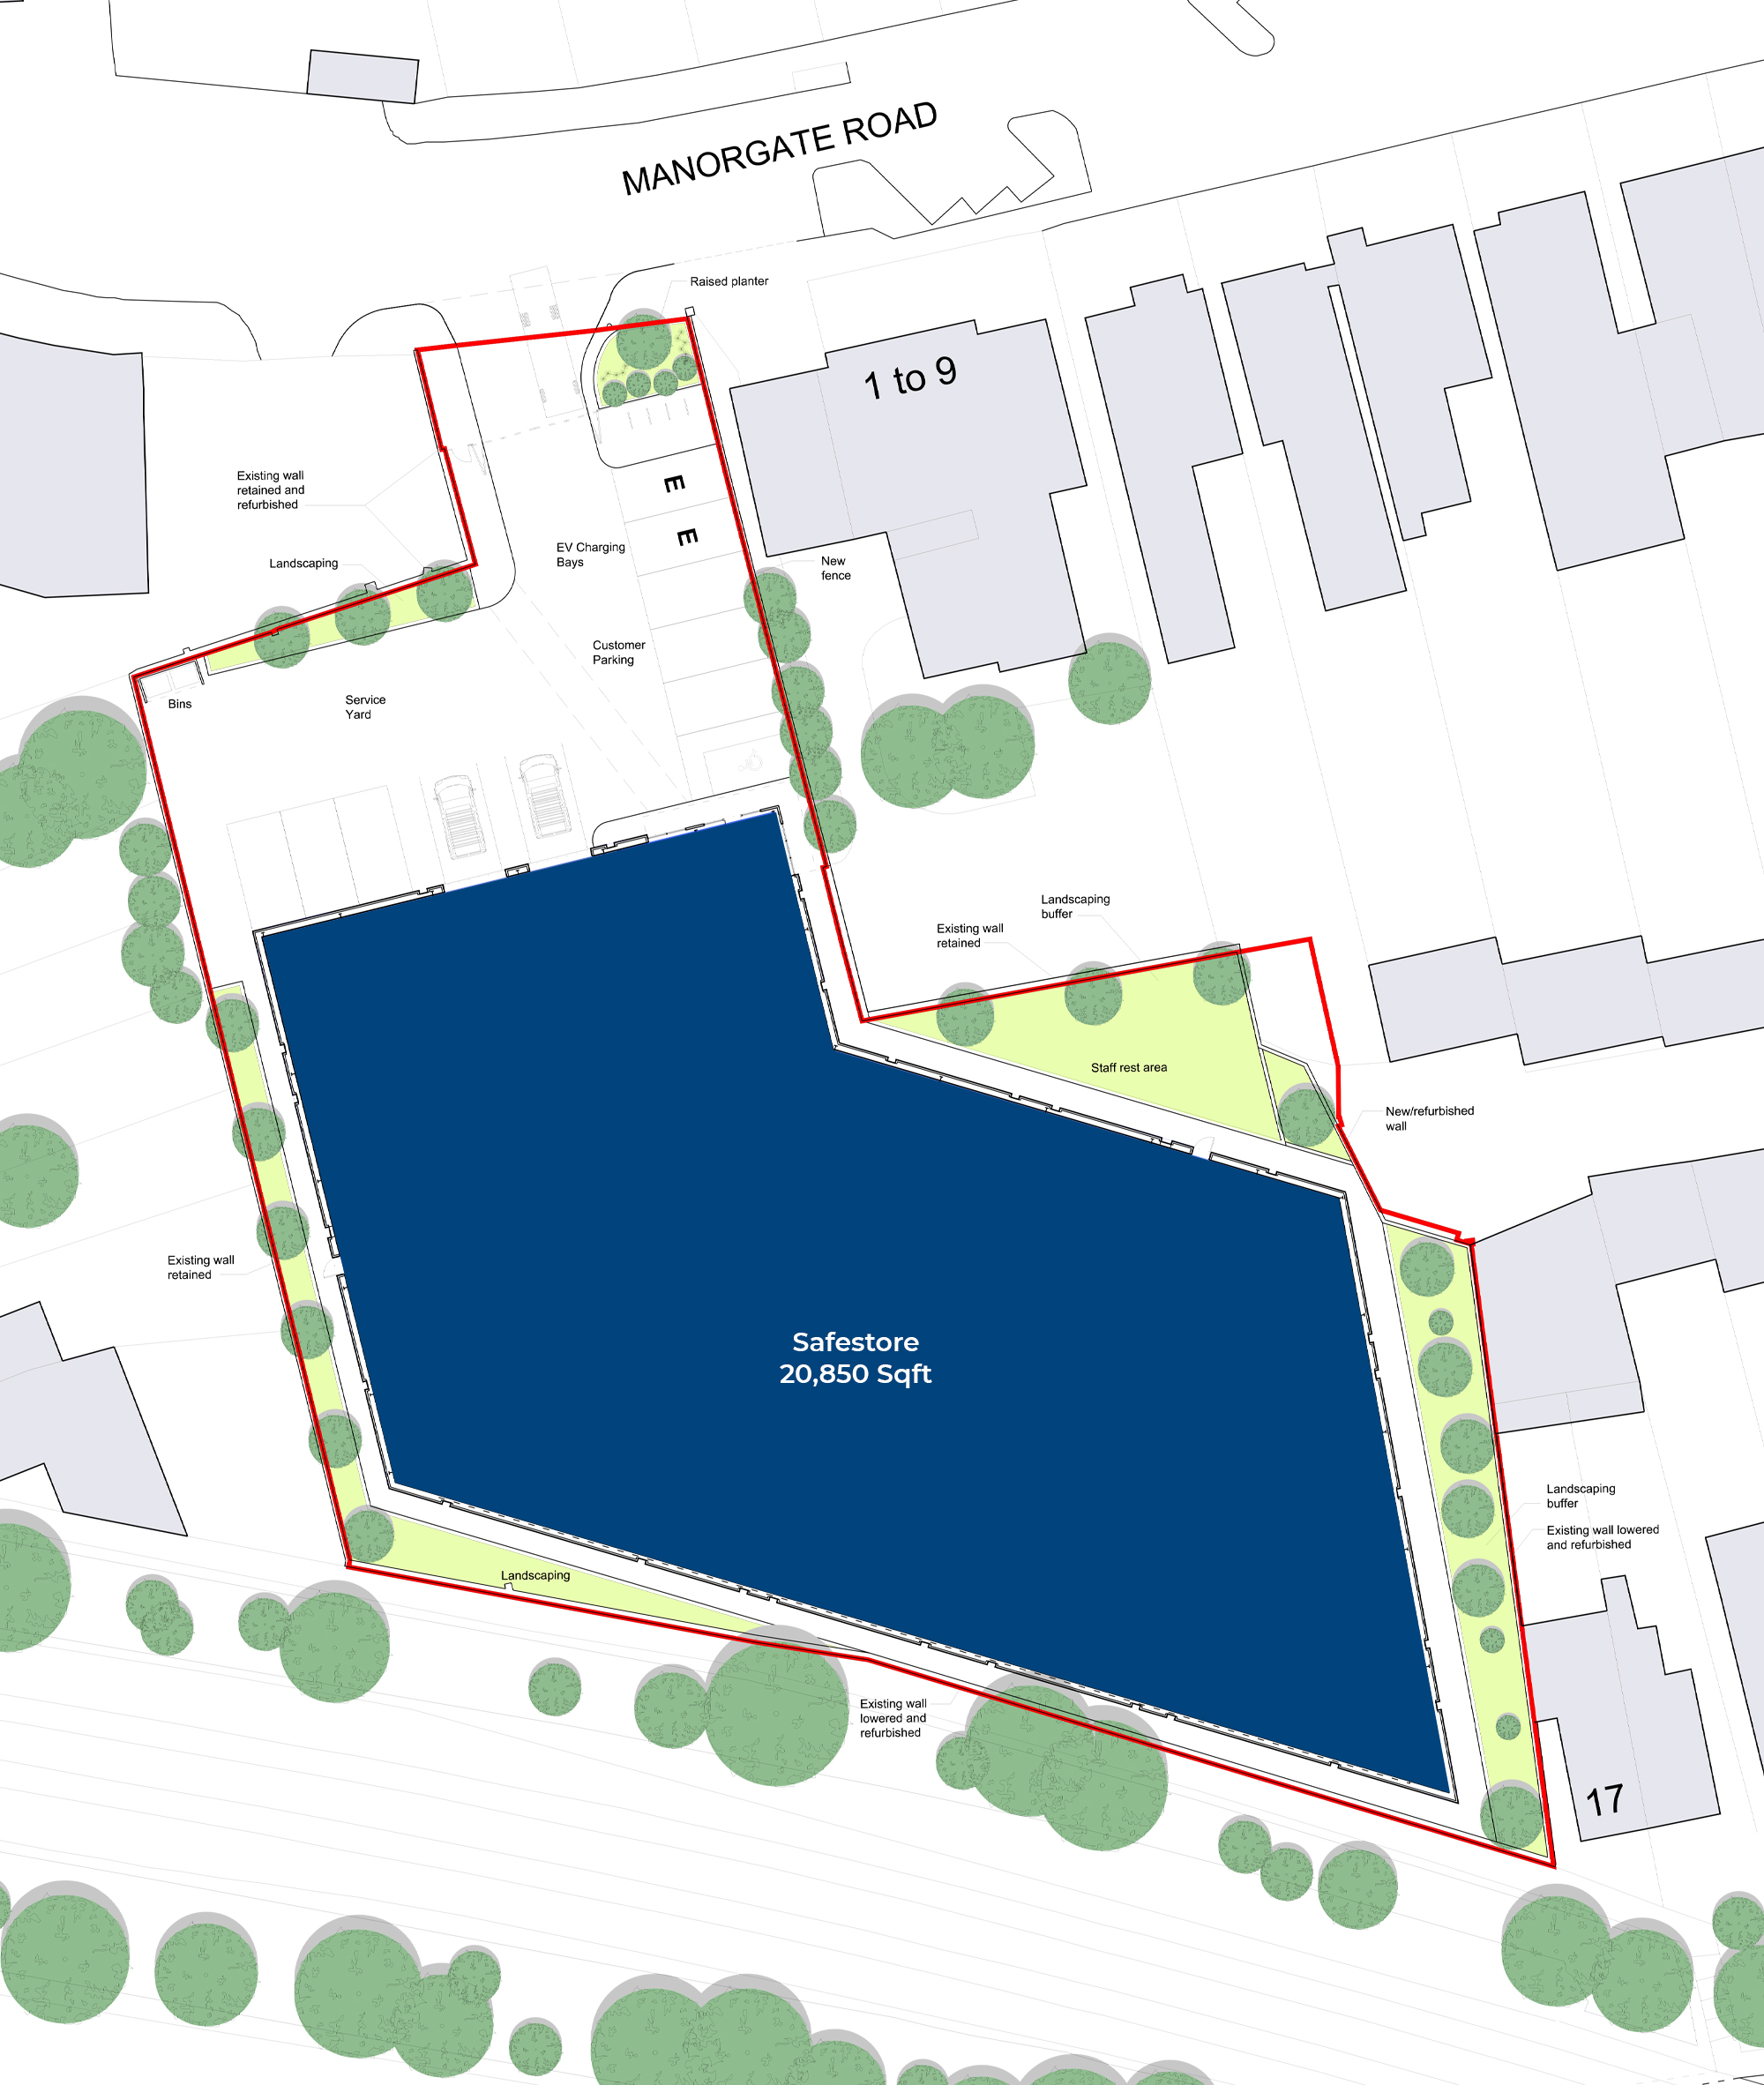 Bird's eye view of revised plan for the site, showing car parking and landscaping around building